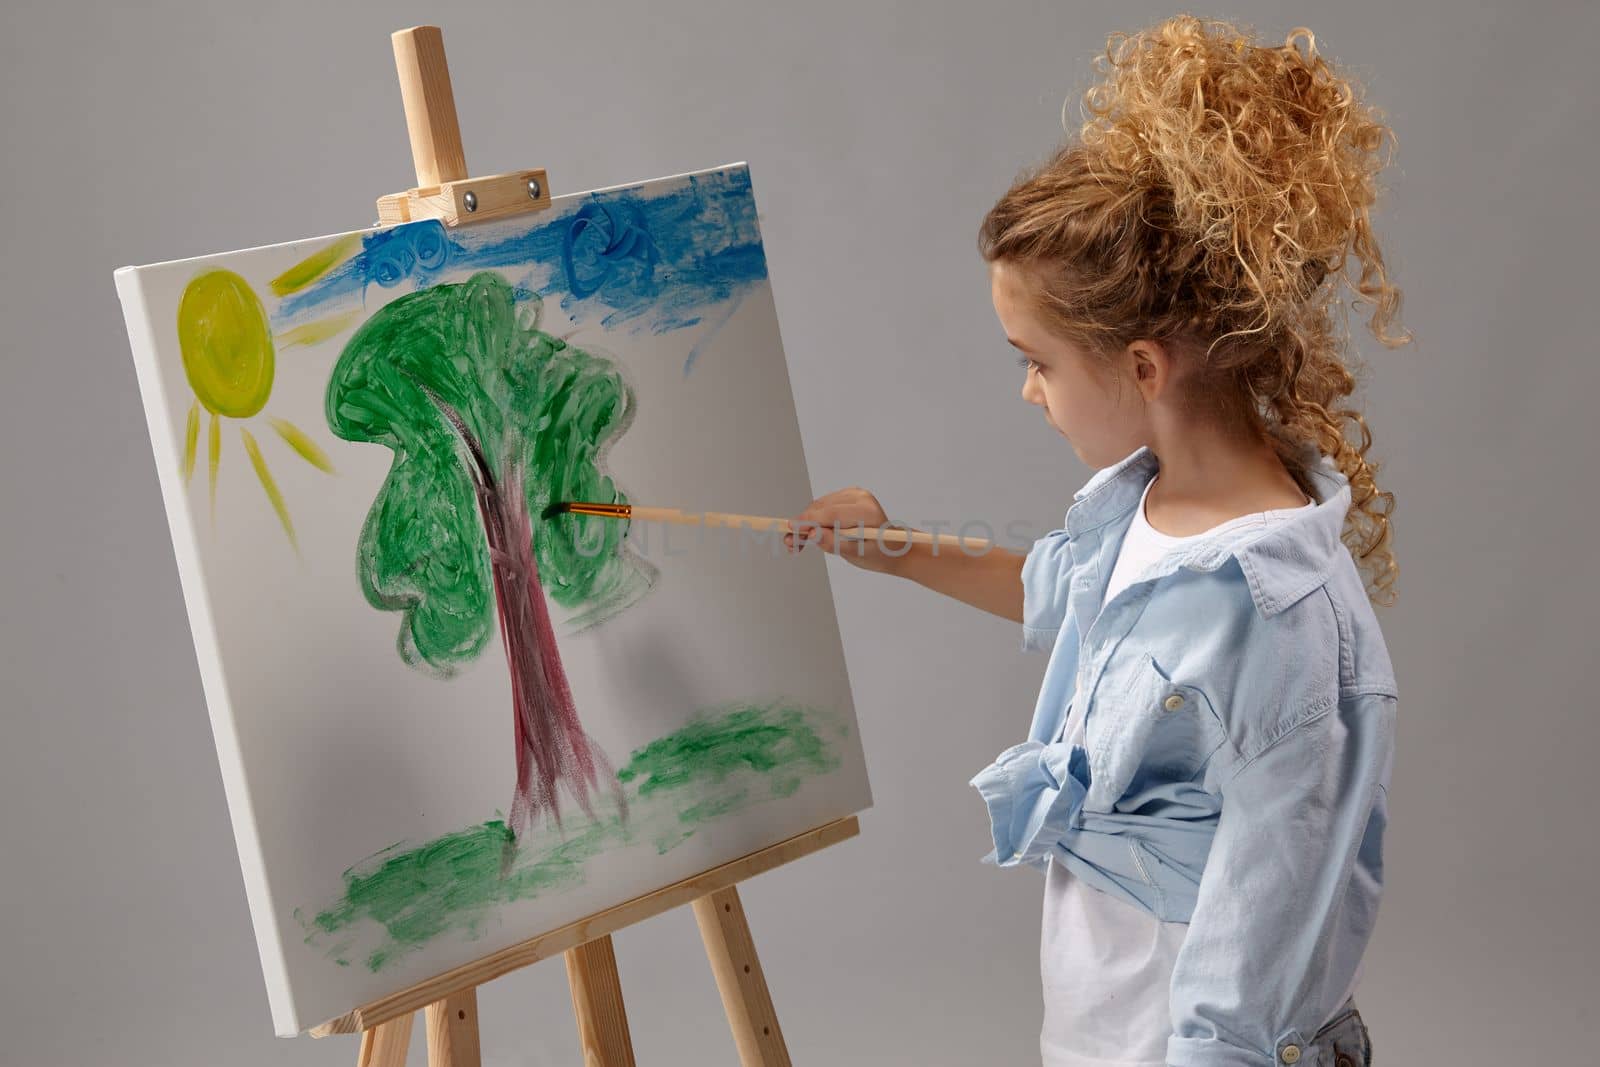 Beautiful school girl whith a curly blond hair, wearing in a blue shirt and white t-shirt is painting with a watercolor brush on an easel, standing on a gray background.